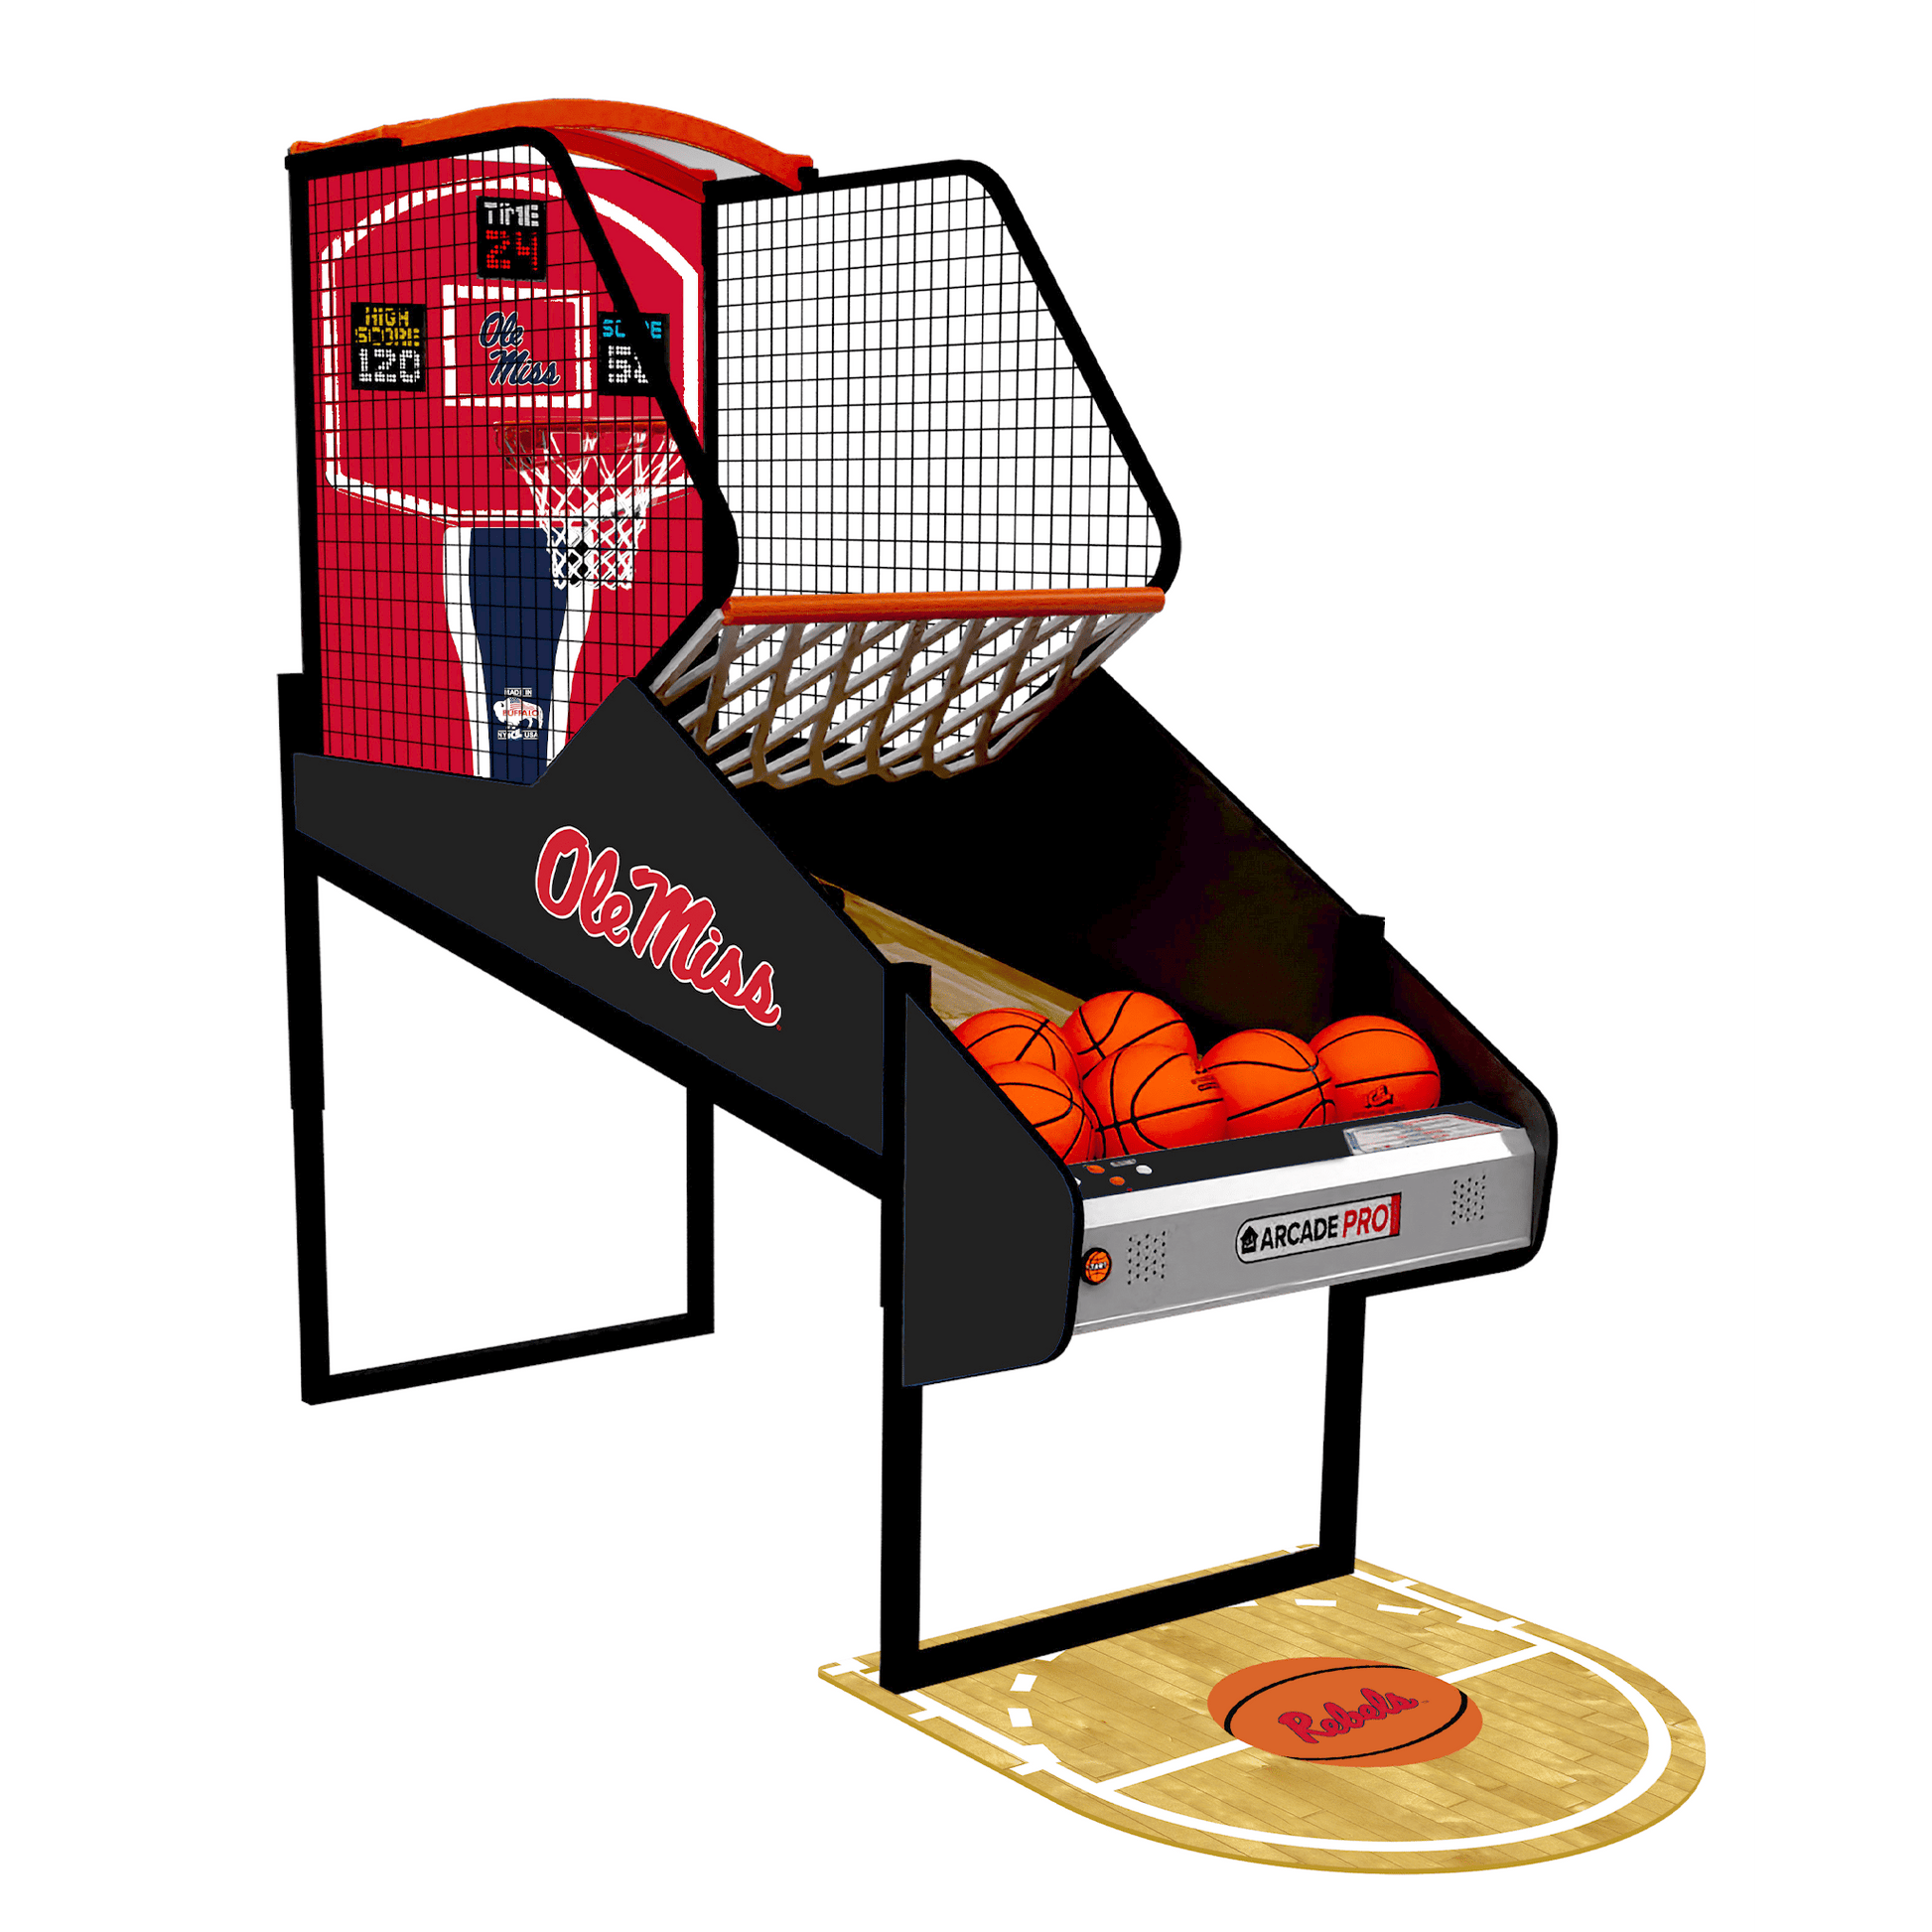 Ole Miss University of Mississippi College Hoops Arcade Innovative Concepts in Entertainment   